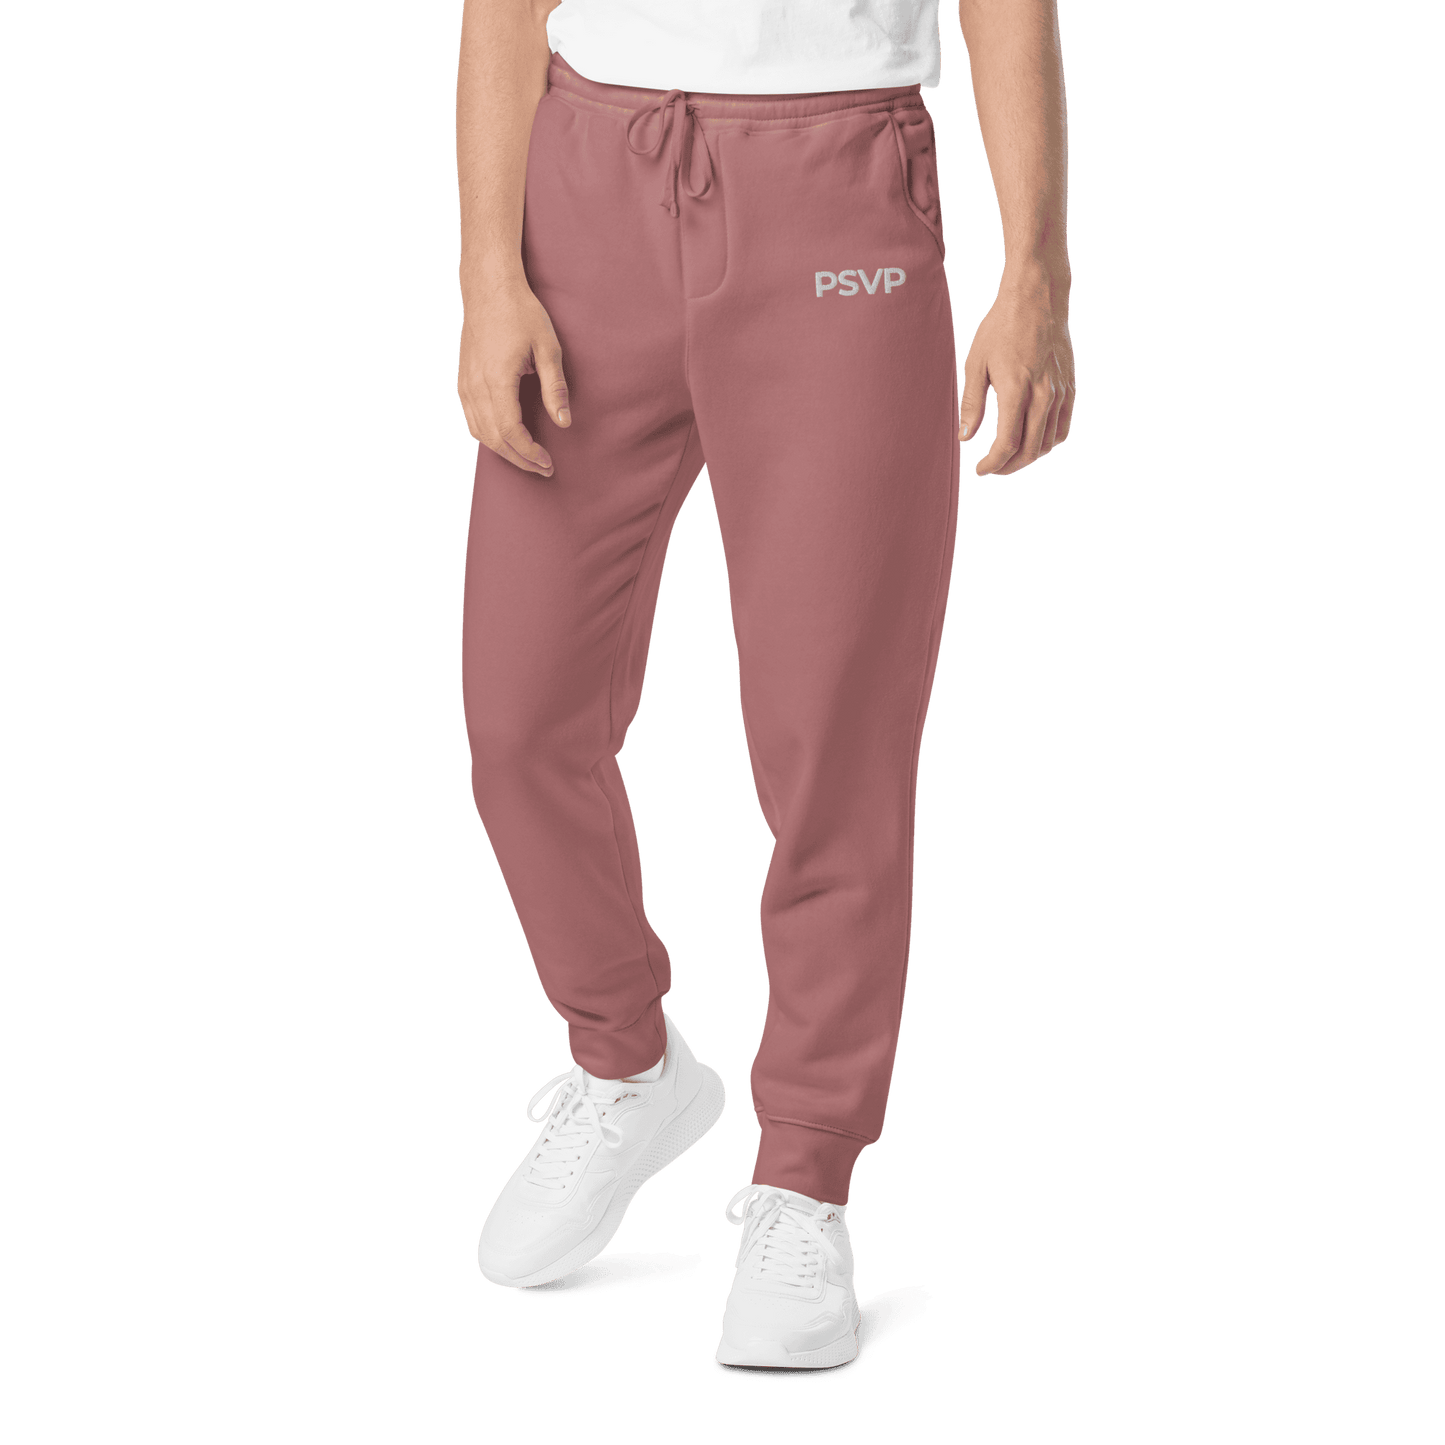 Load image into Gallery viewer, PSVP Pigment-Dyed Maroon Sweatpants - Embroidery | Sweatpants | PARADIS SVP
